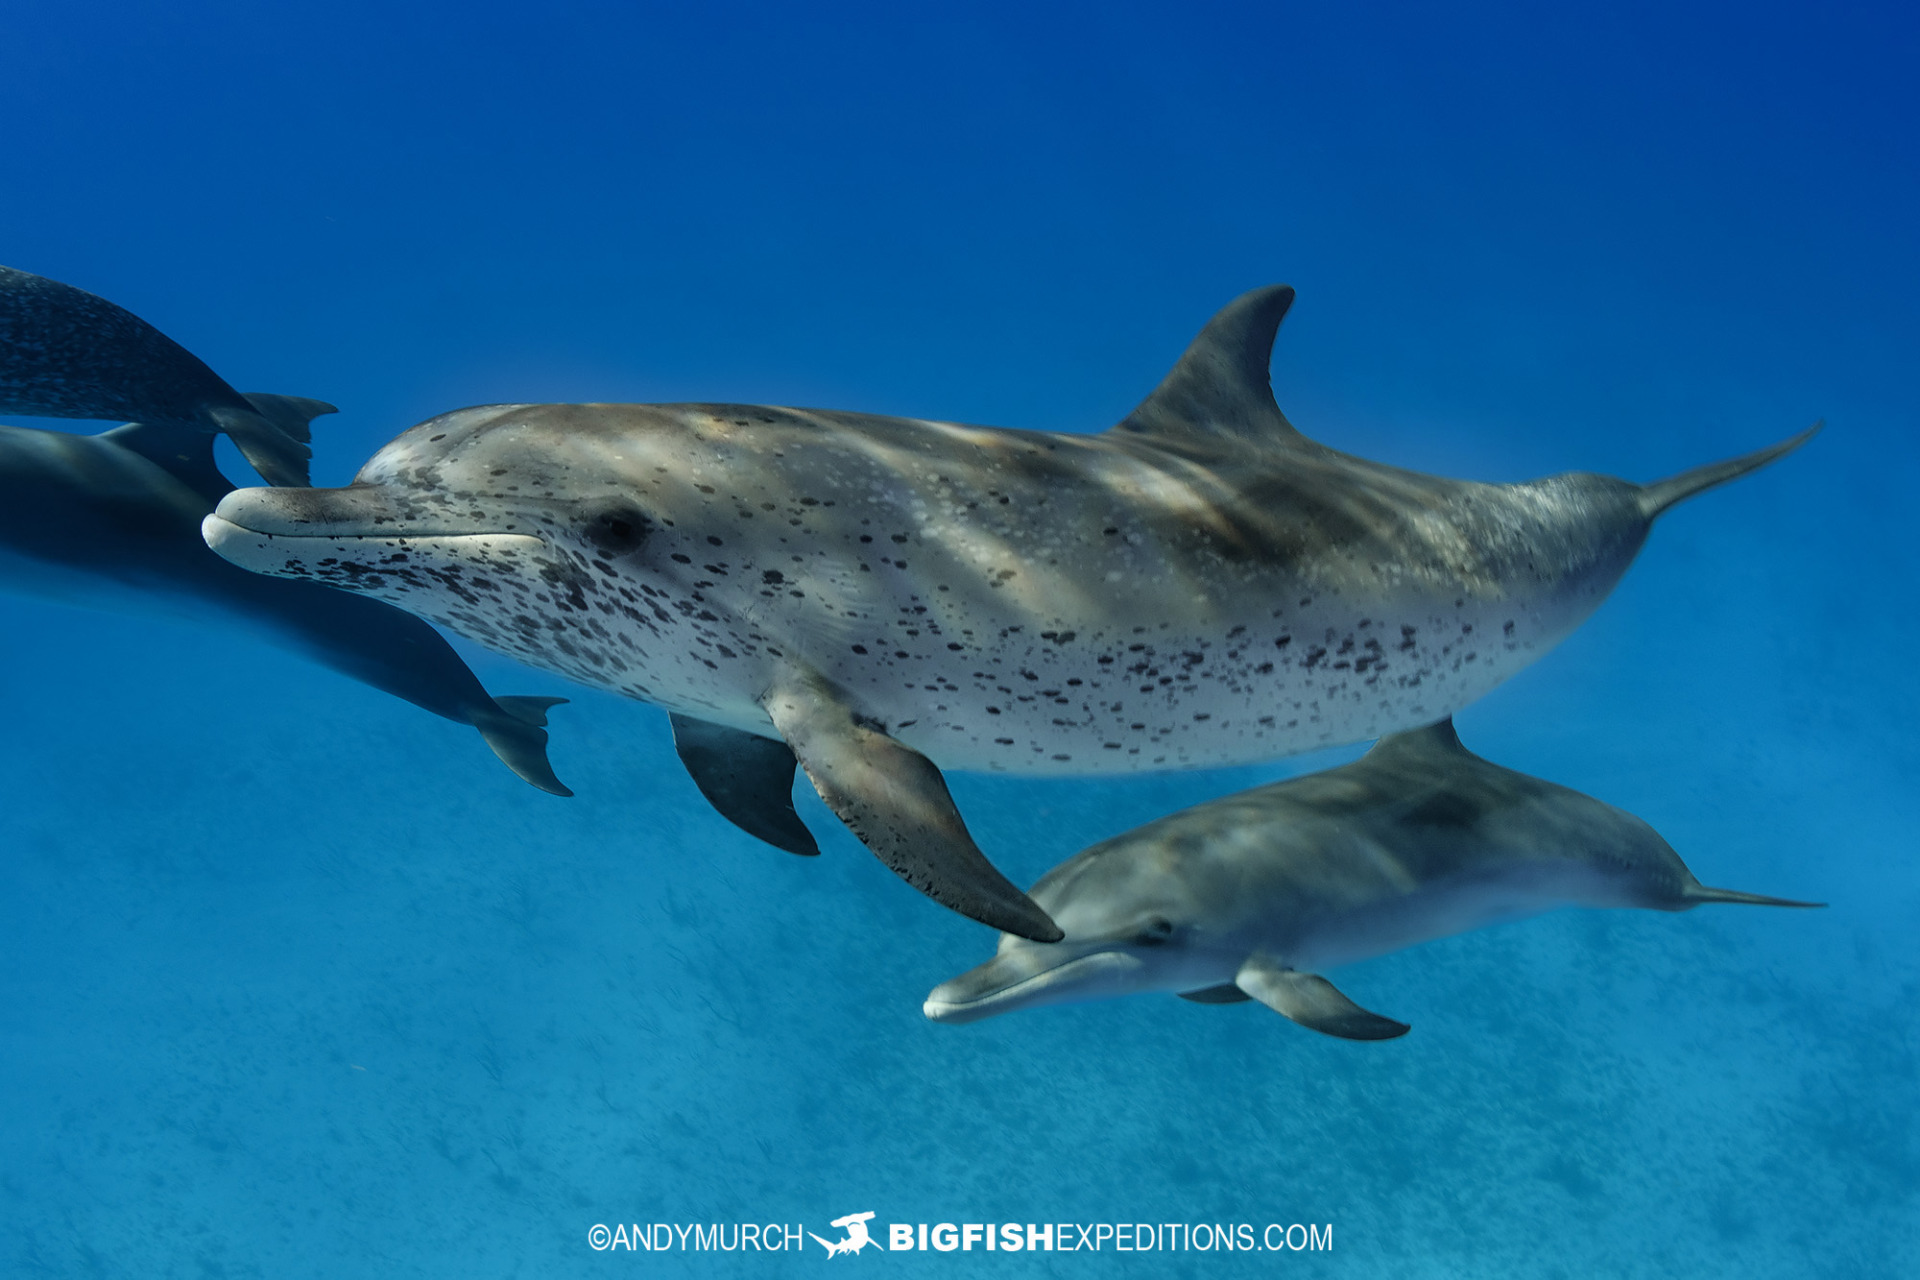 Snorkeling with Atlantic spotted dolphins in the Bahamas.